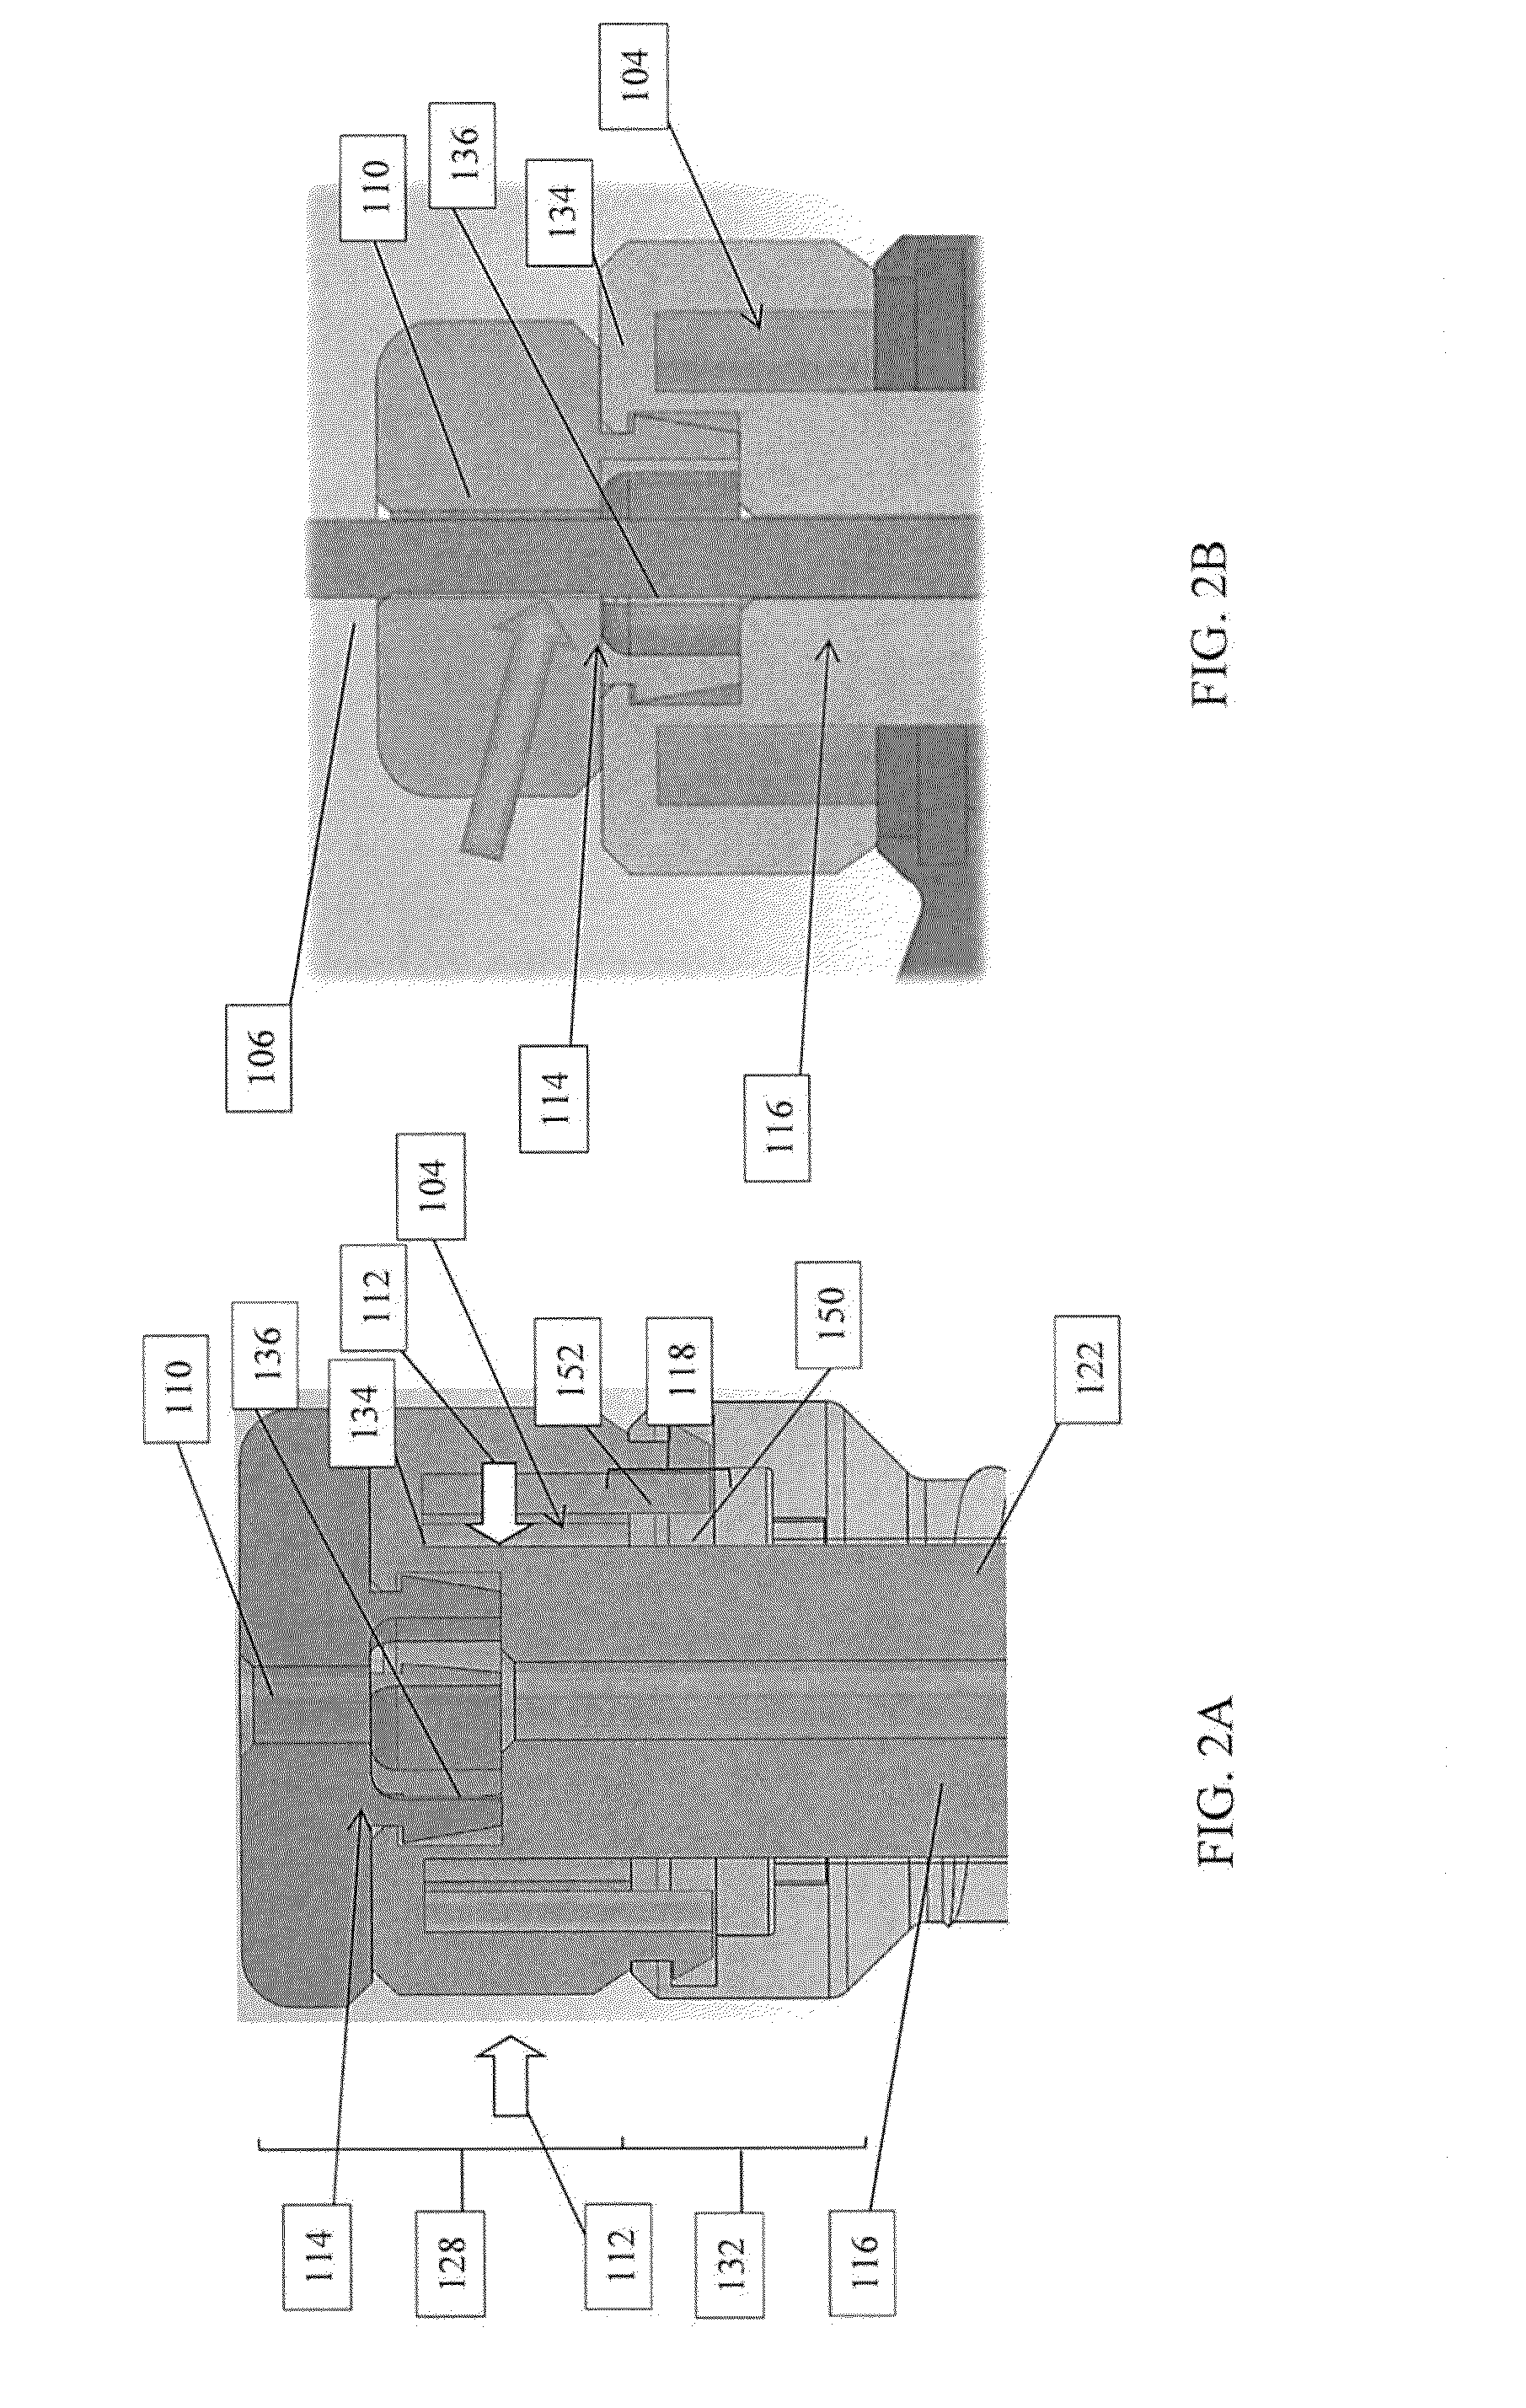 Systems and Methods for Surgical Access to Delicate Tissues